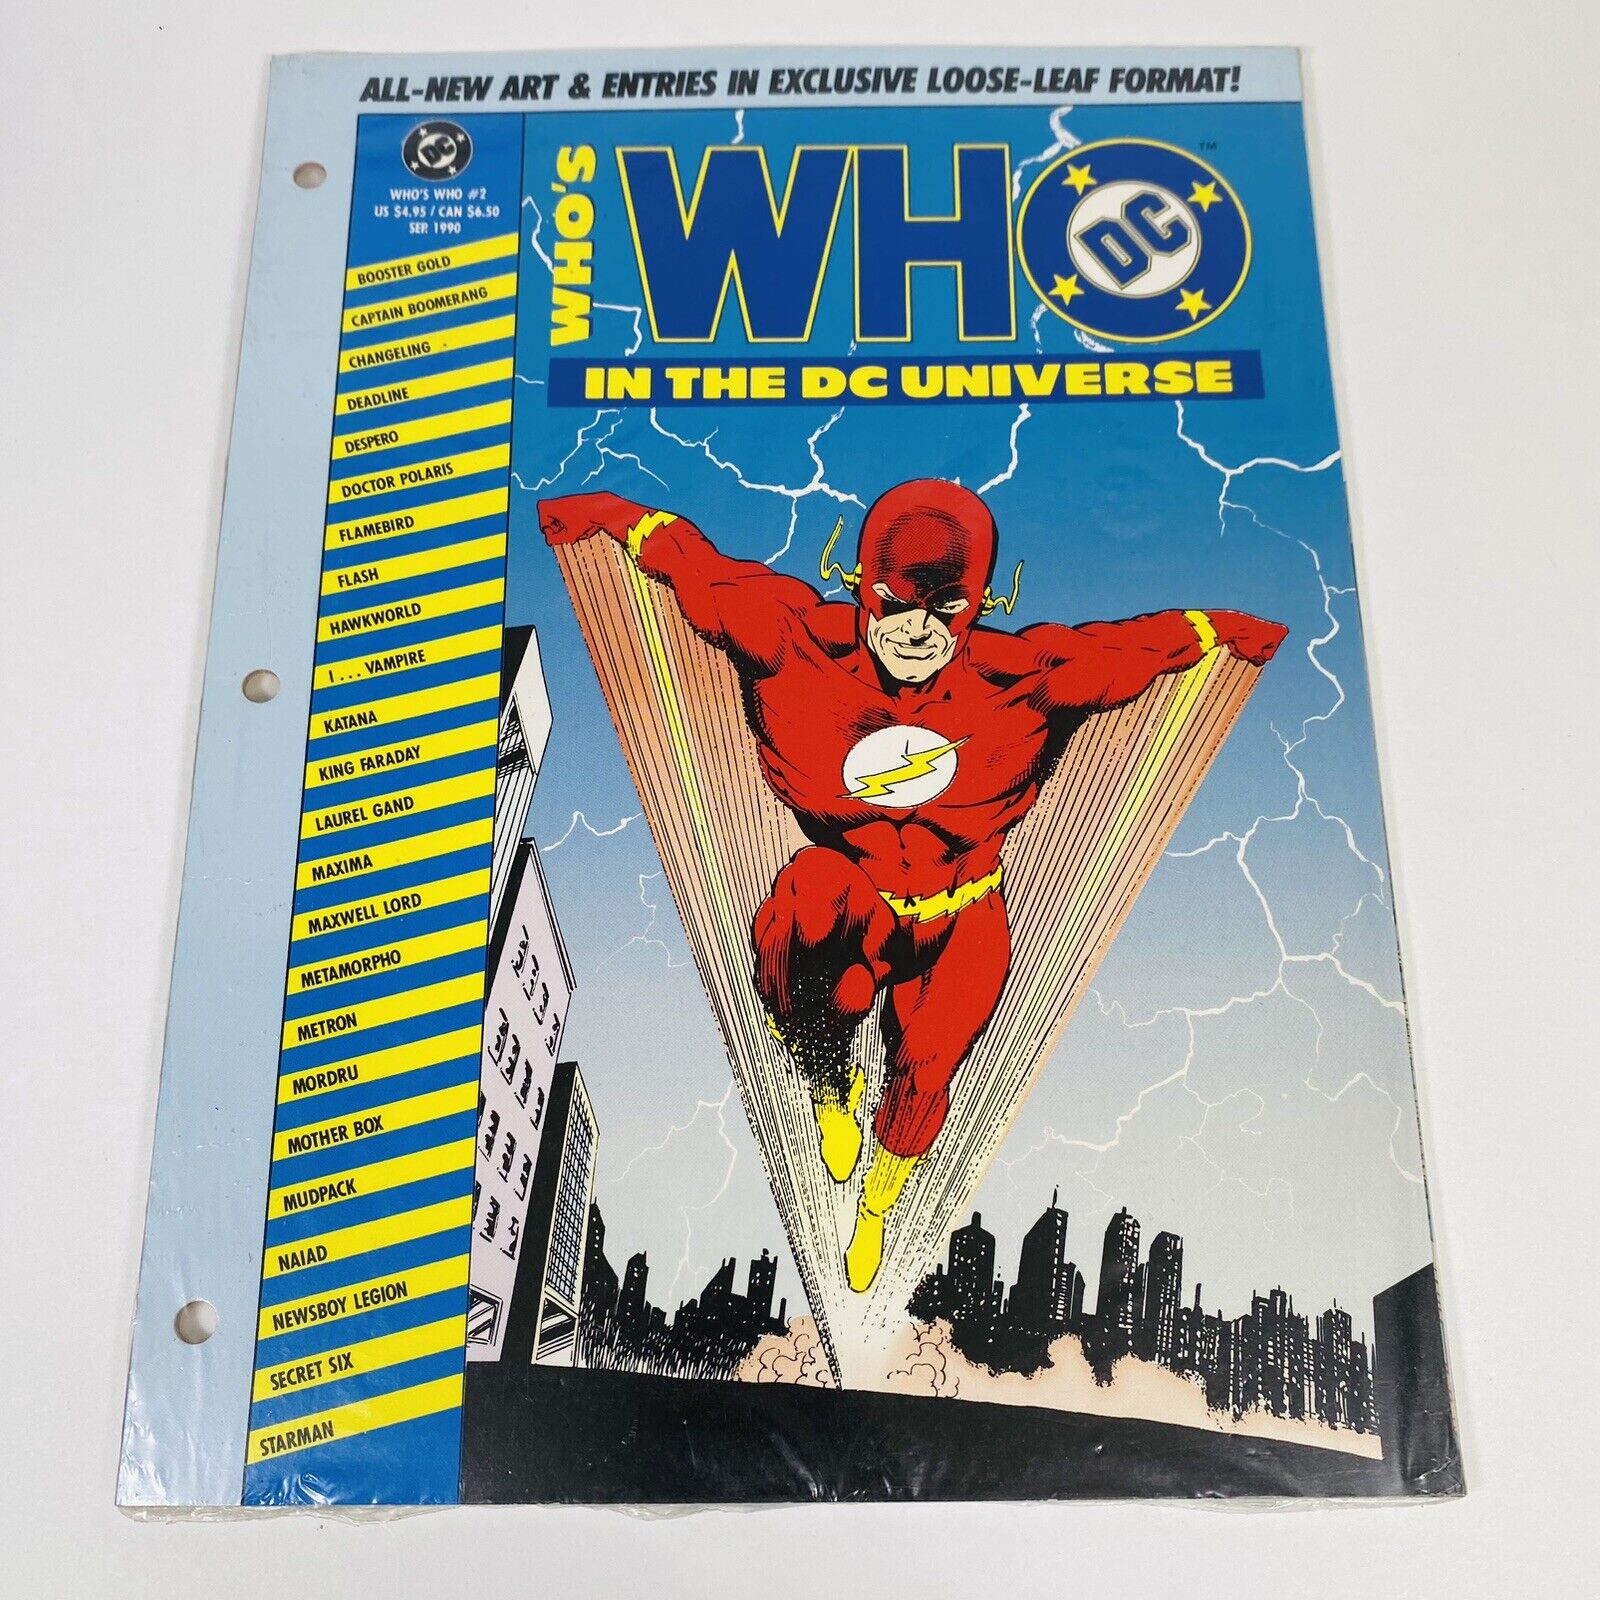 Who's Who in the DC Universe #2 September 1990 Factory Sealed Flash Loose Leaf